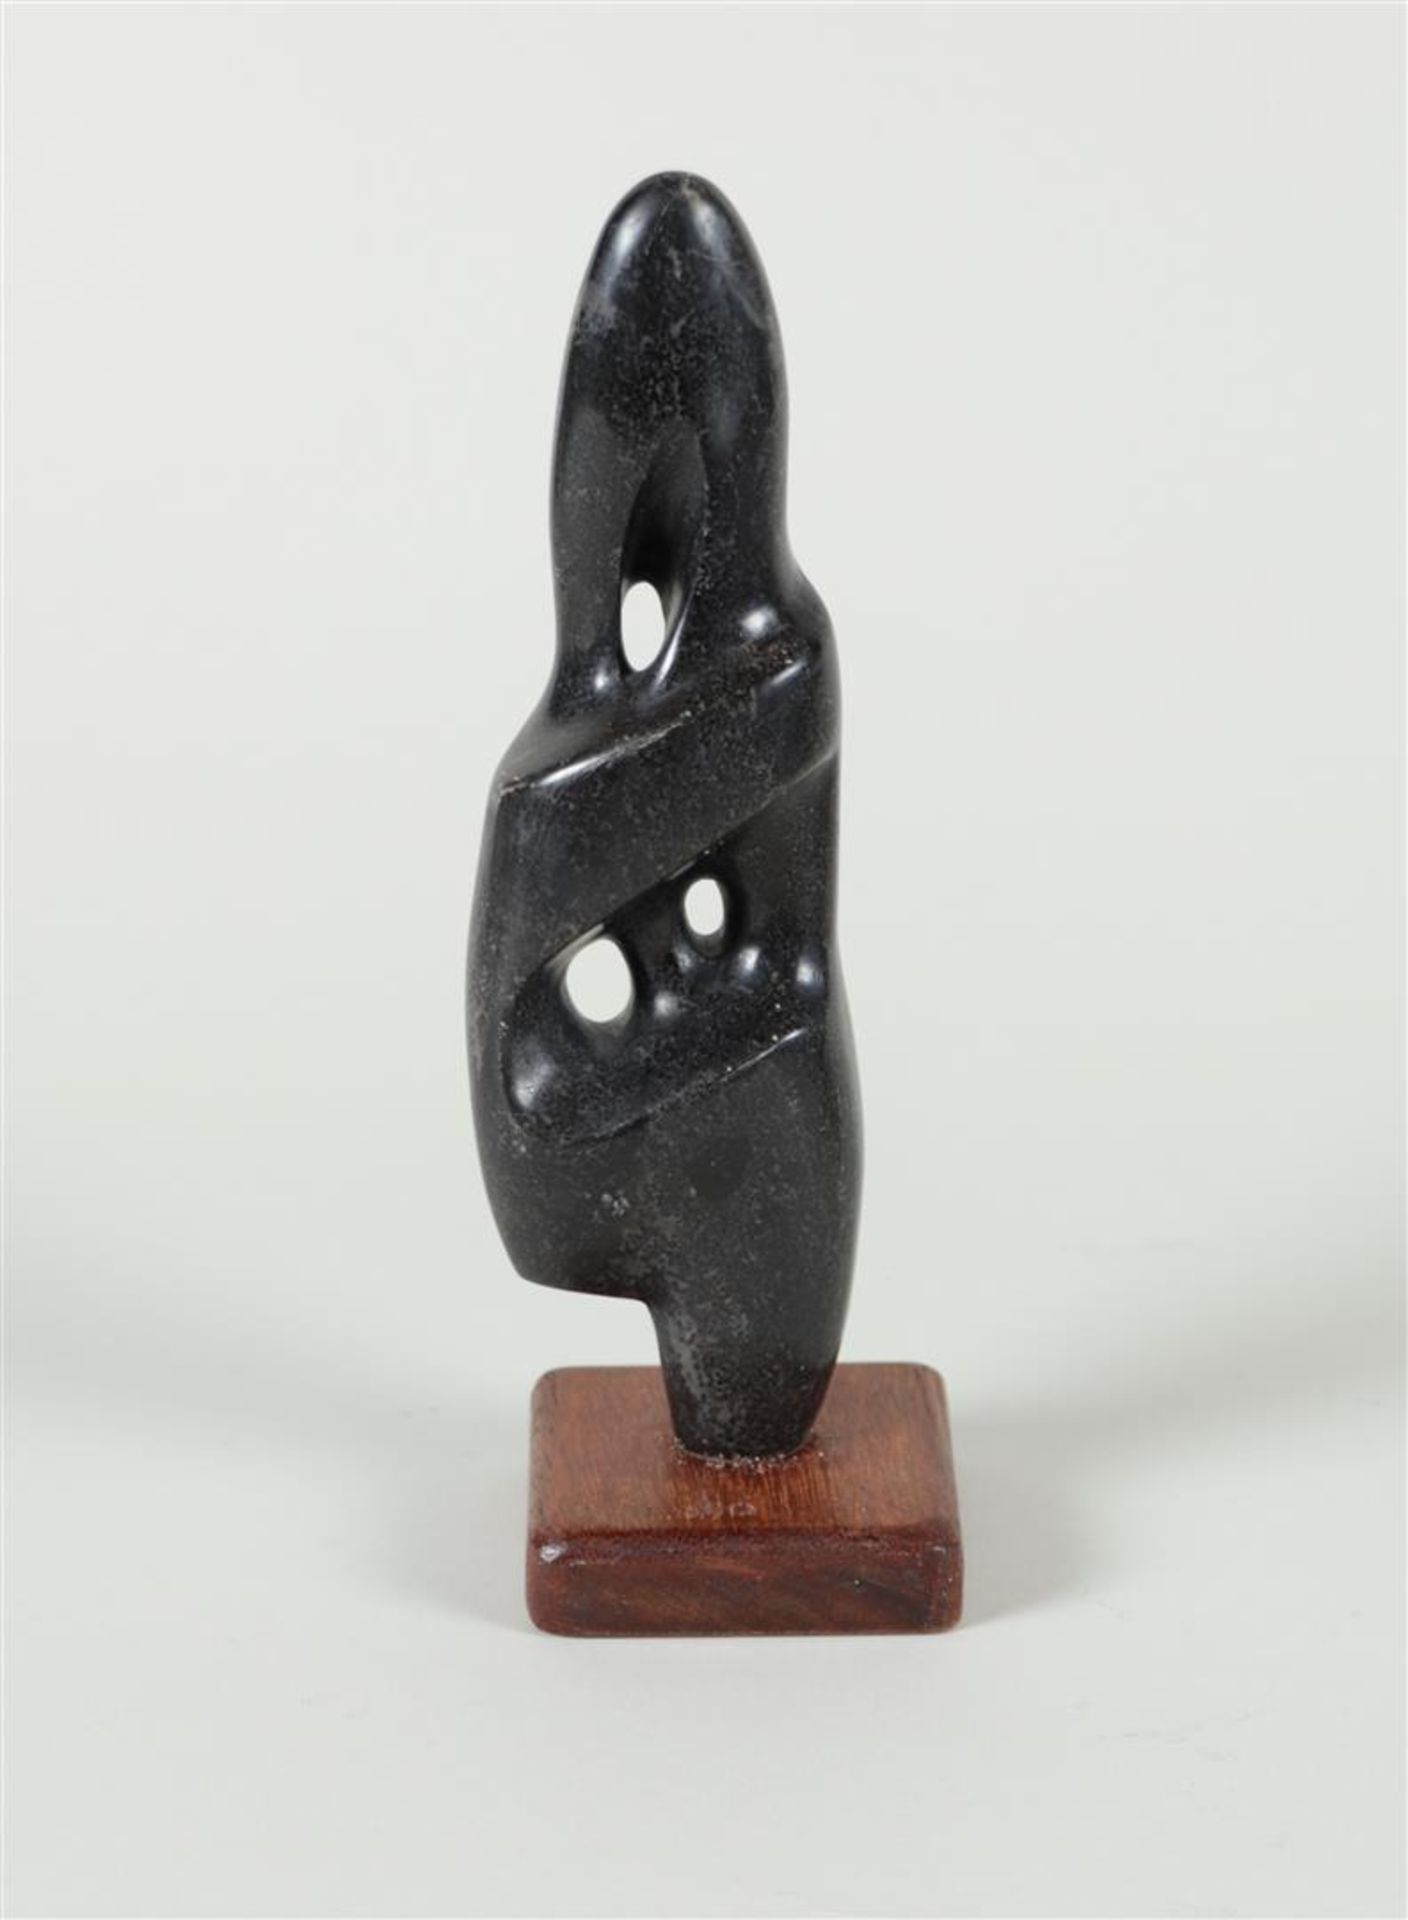 A unique stone figure on a wooden base, signed 'Lobo' (in the base),
23,5 (incl. sokkel).